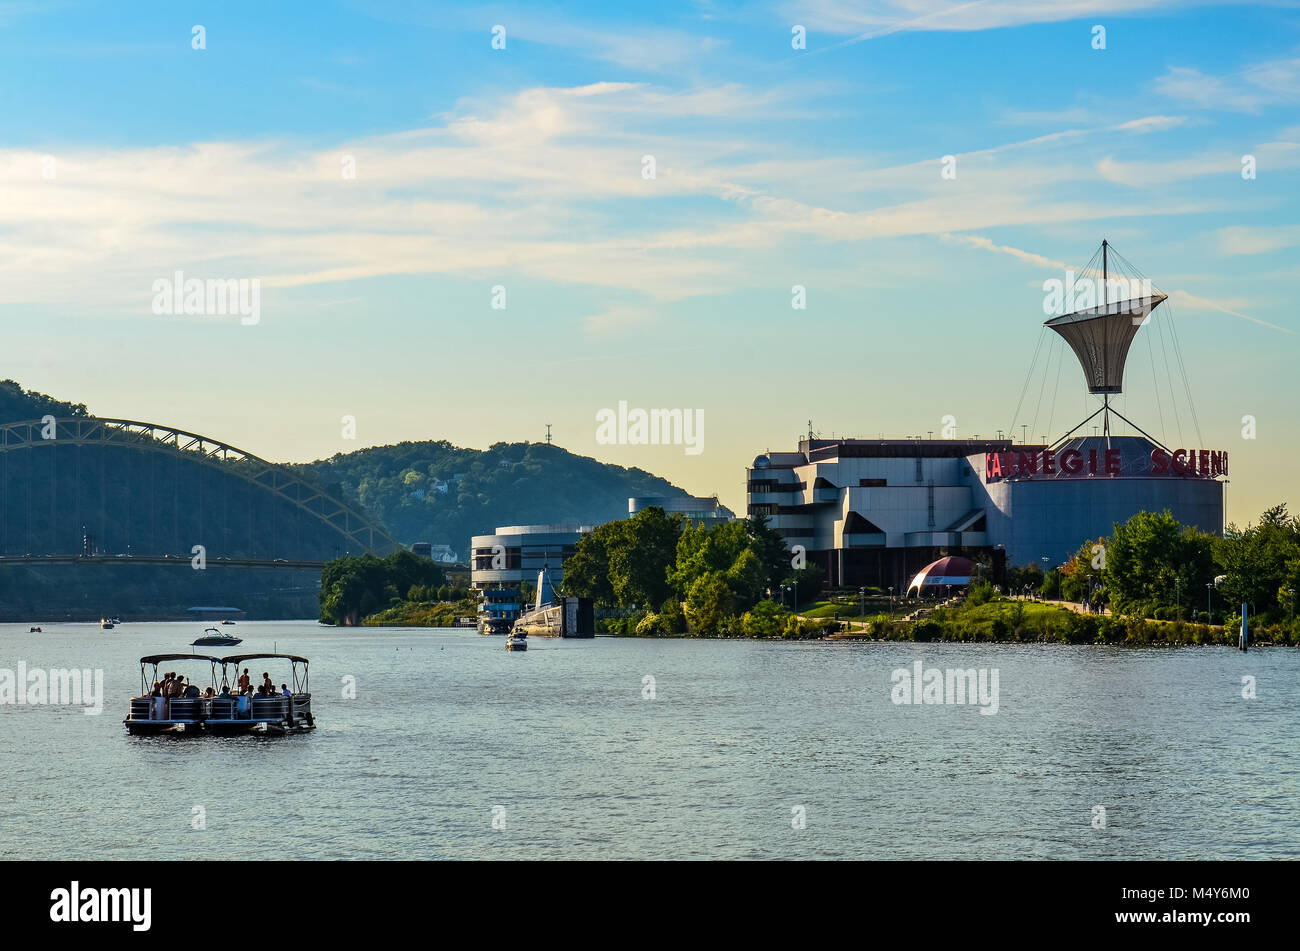 View of Ohio River with bridge and the Carnegie Science Center museum at center, with a party boat in the foreground, as seen from Point State Park. Stock Photo